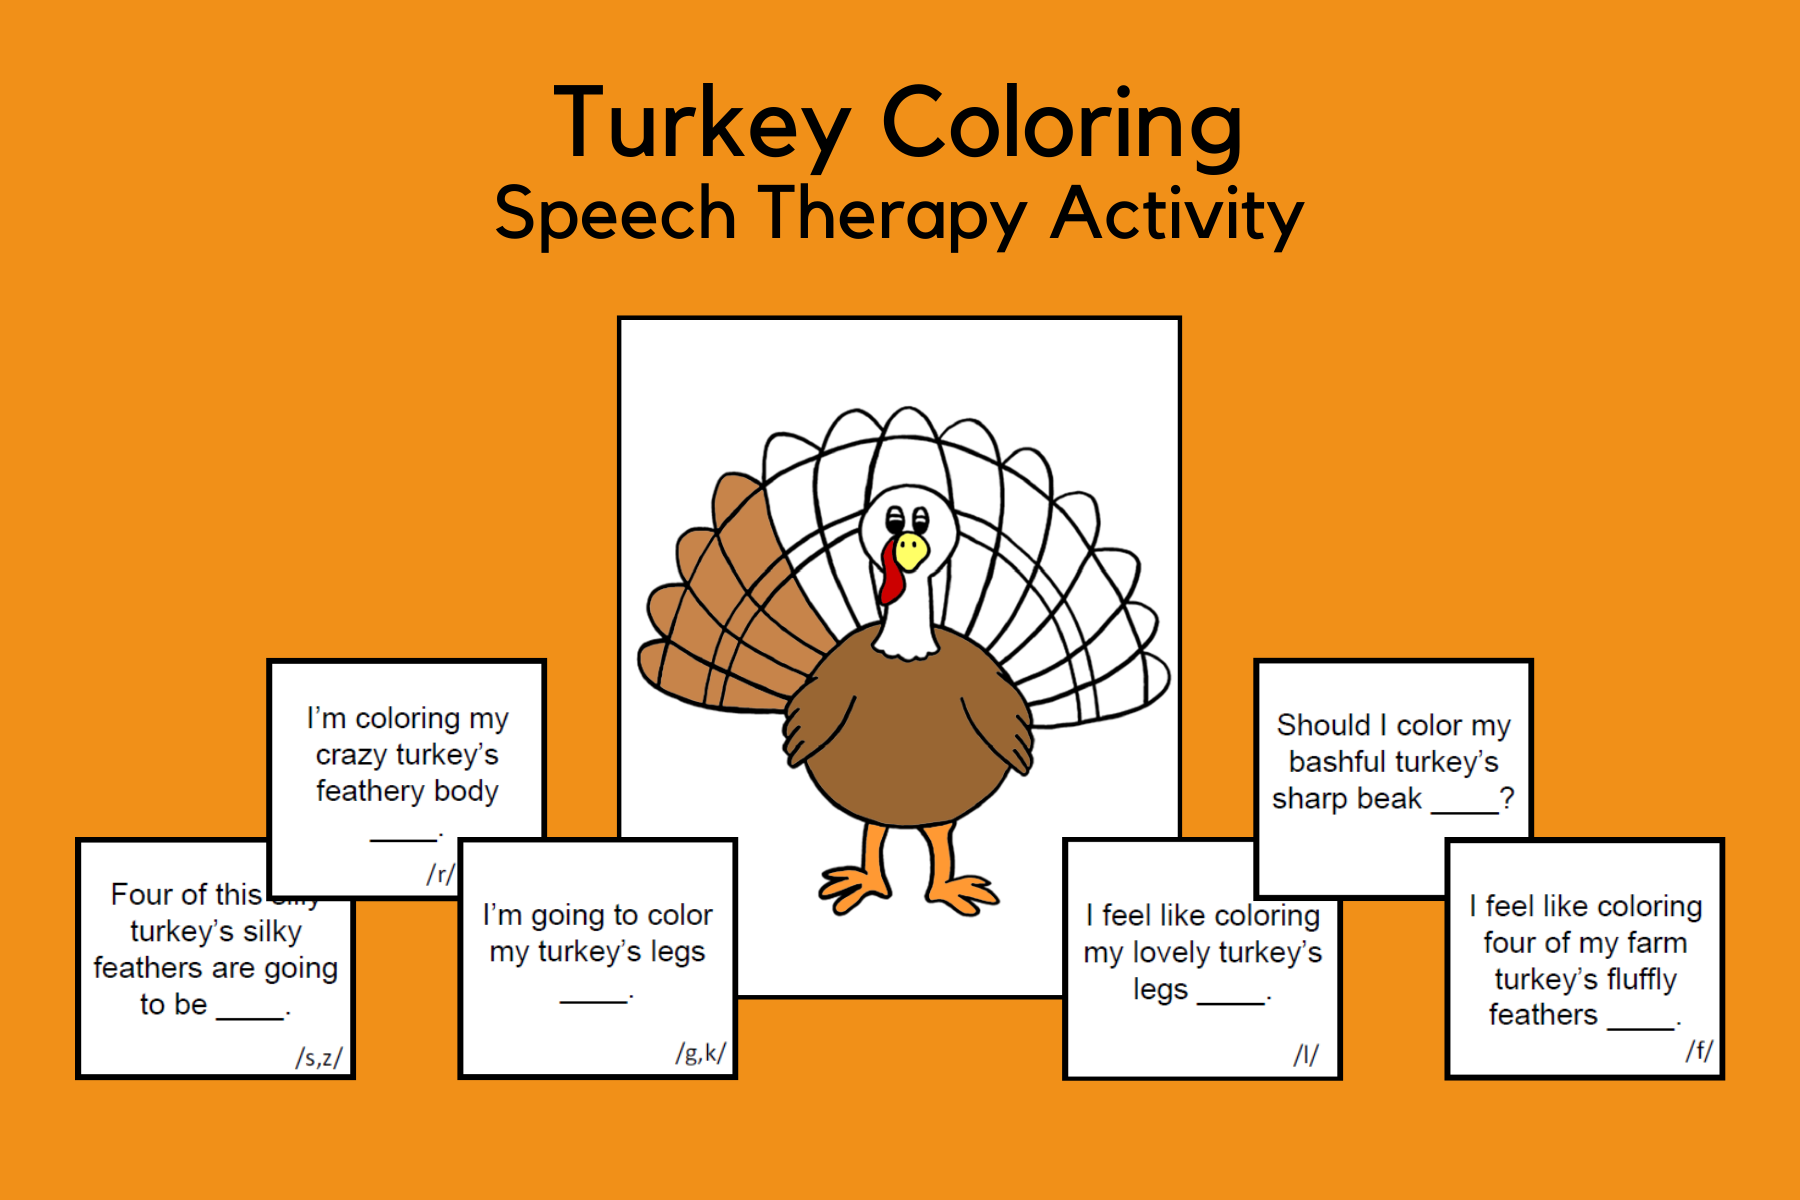 Turkey Coloring Speech Therapy Activity